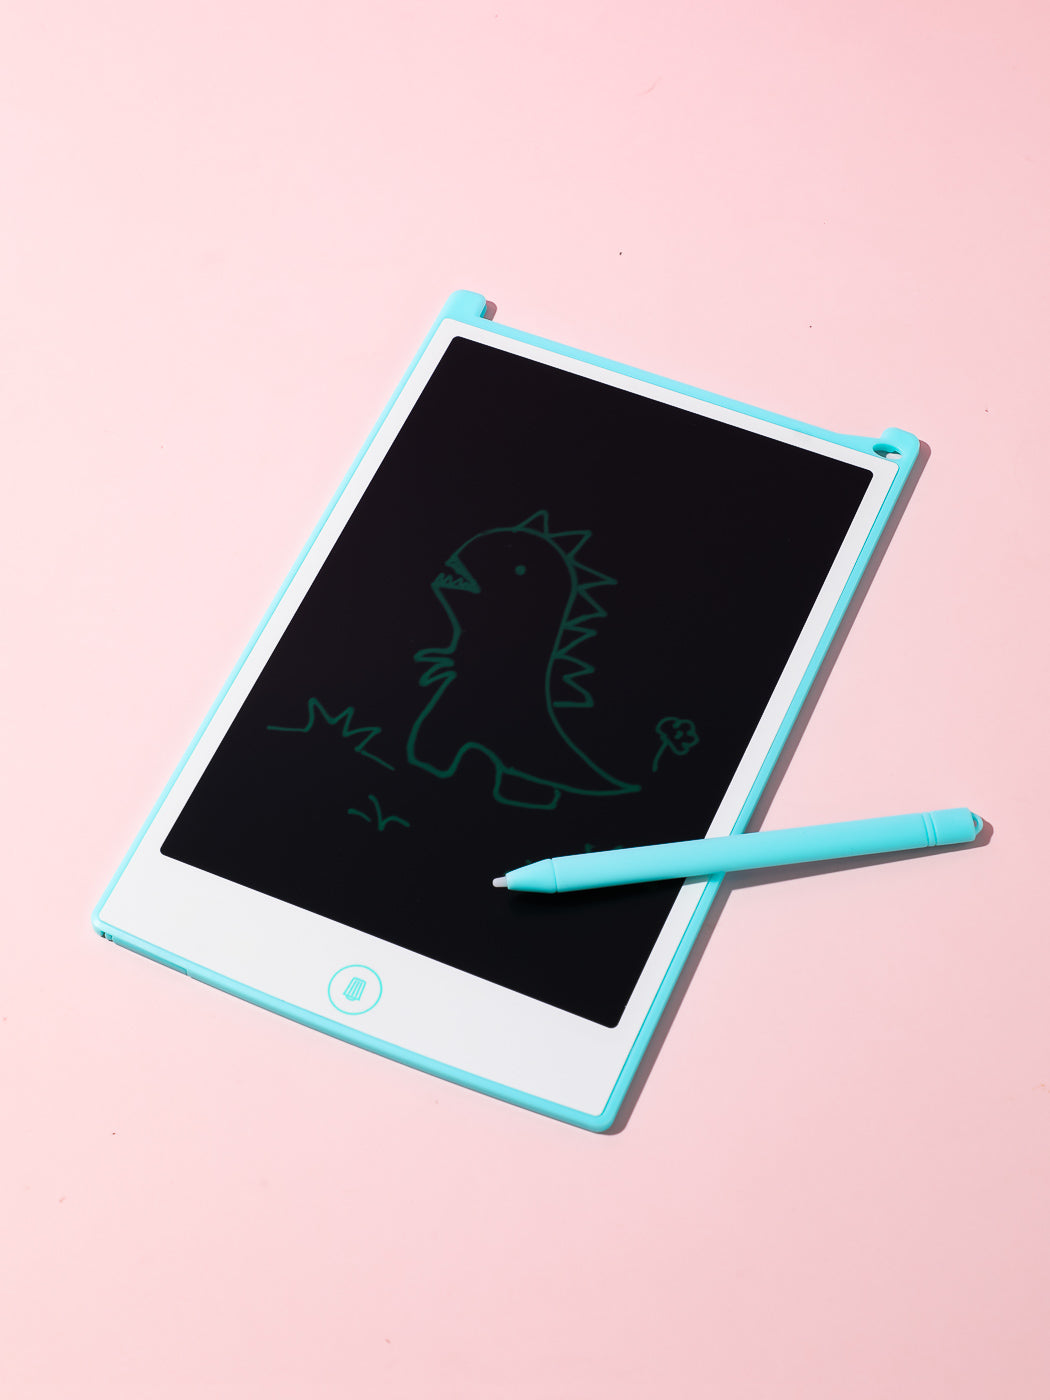 MINISO LCD GRAFFITI DRAWING TABLET (BLUE) 2008406611101 ELECTRIC DRAWING TABLET